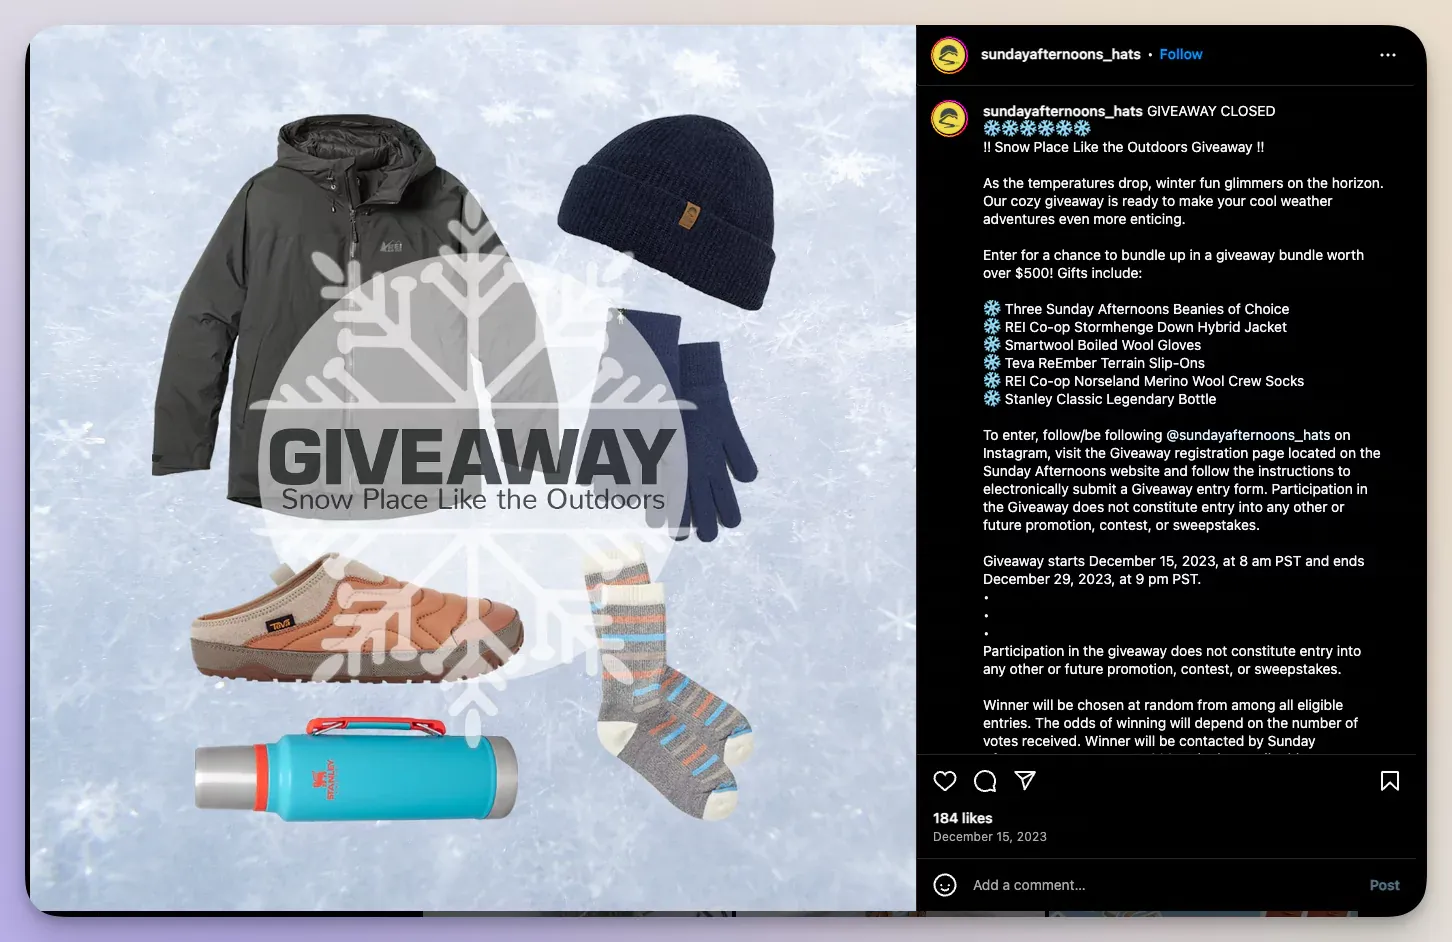 Sunday afternoon hats giveaway on Instagram